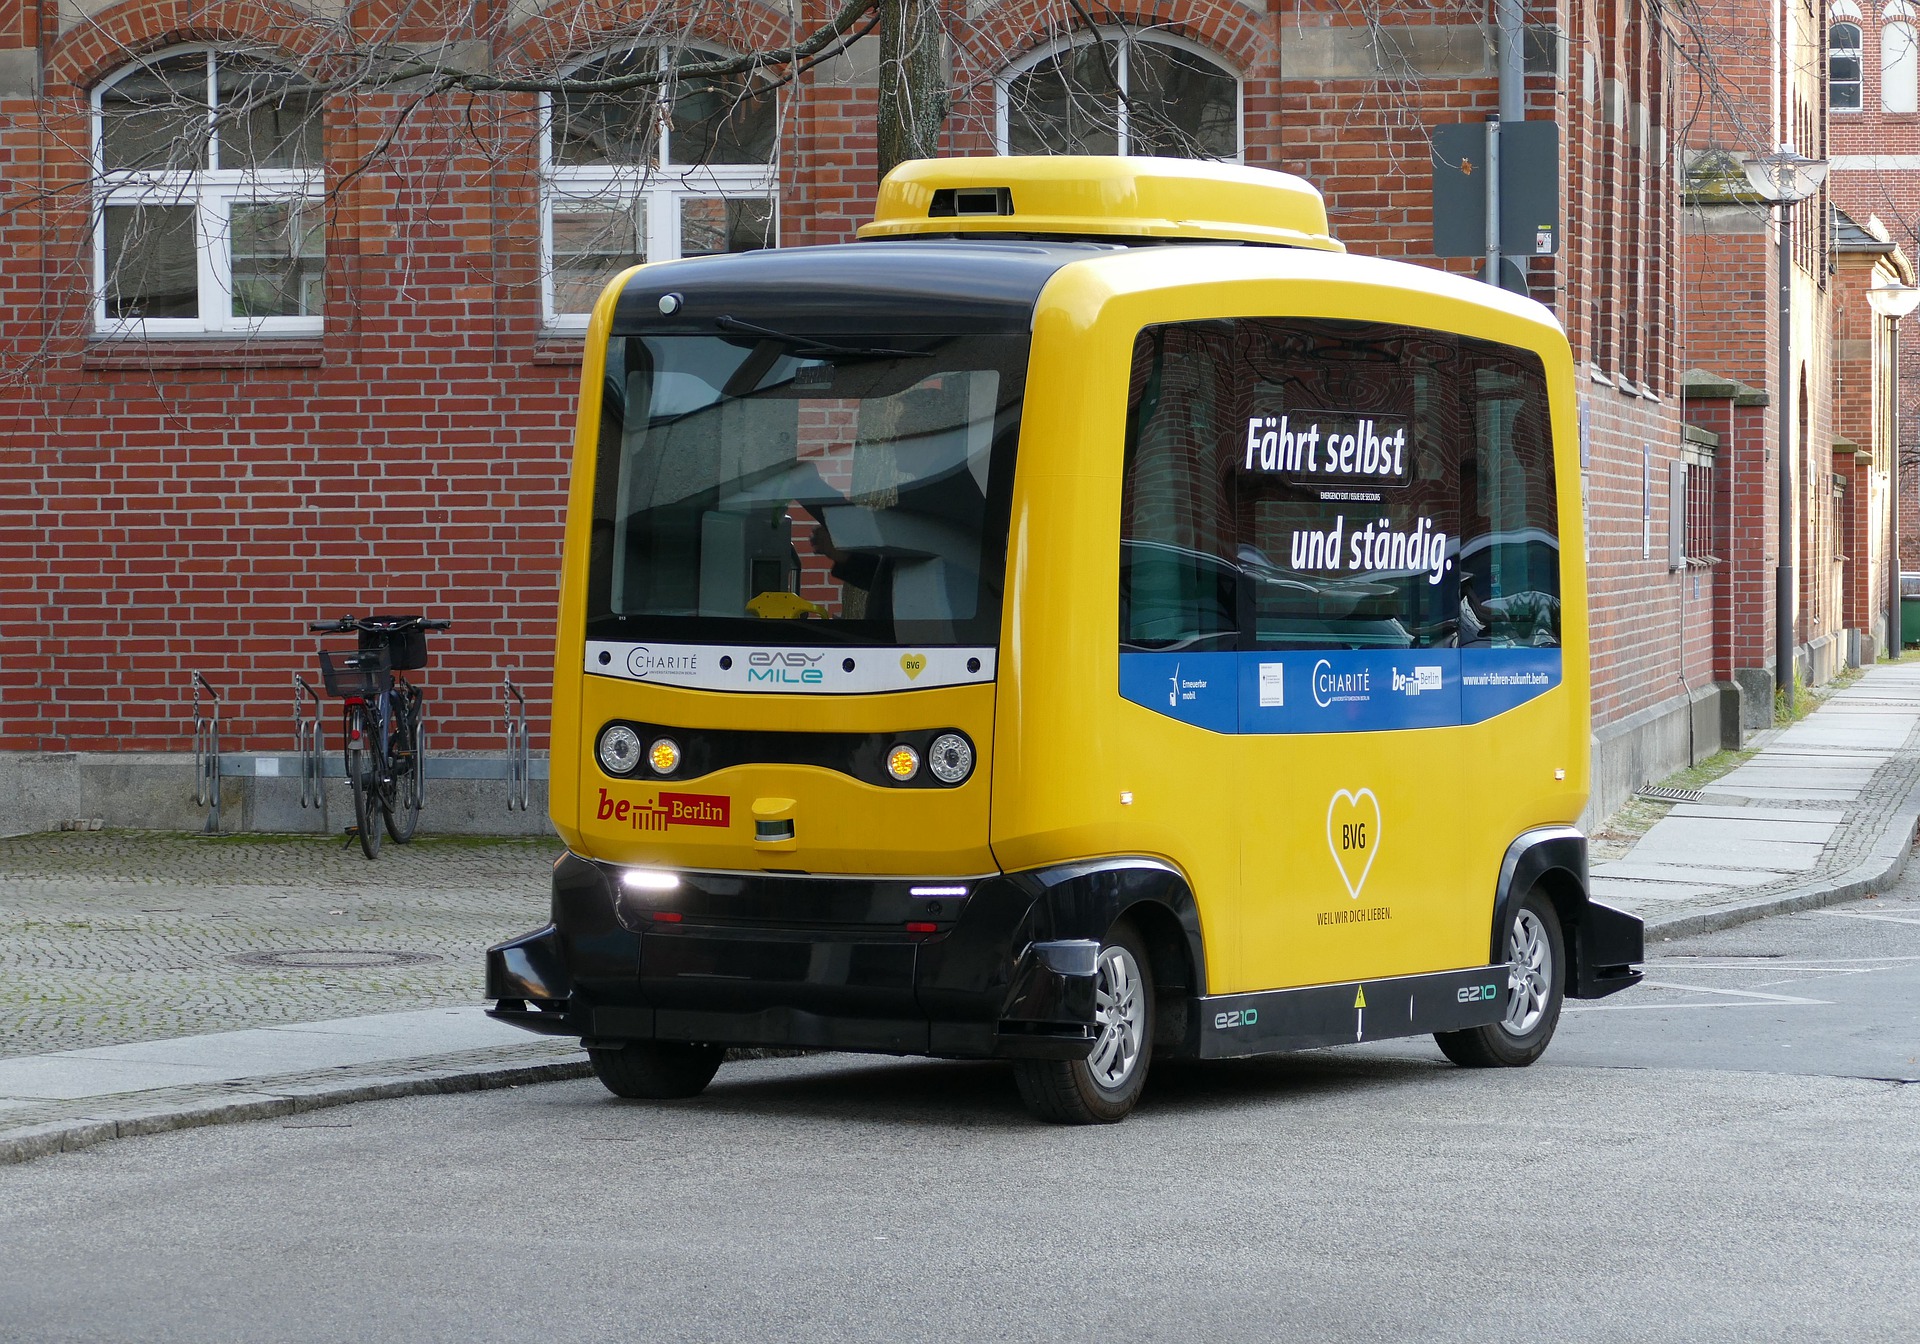 Affordable driverless cars could curb public transit